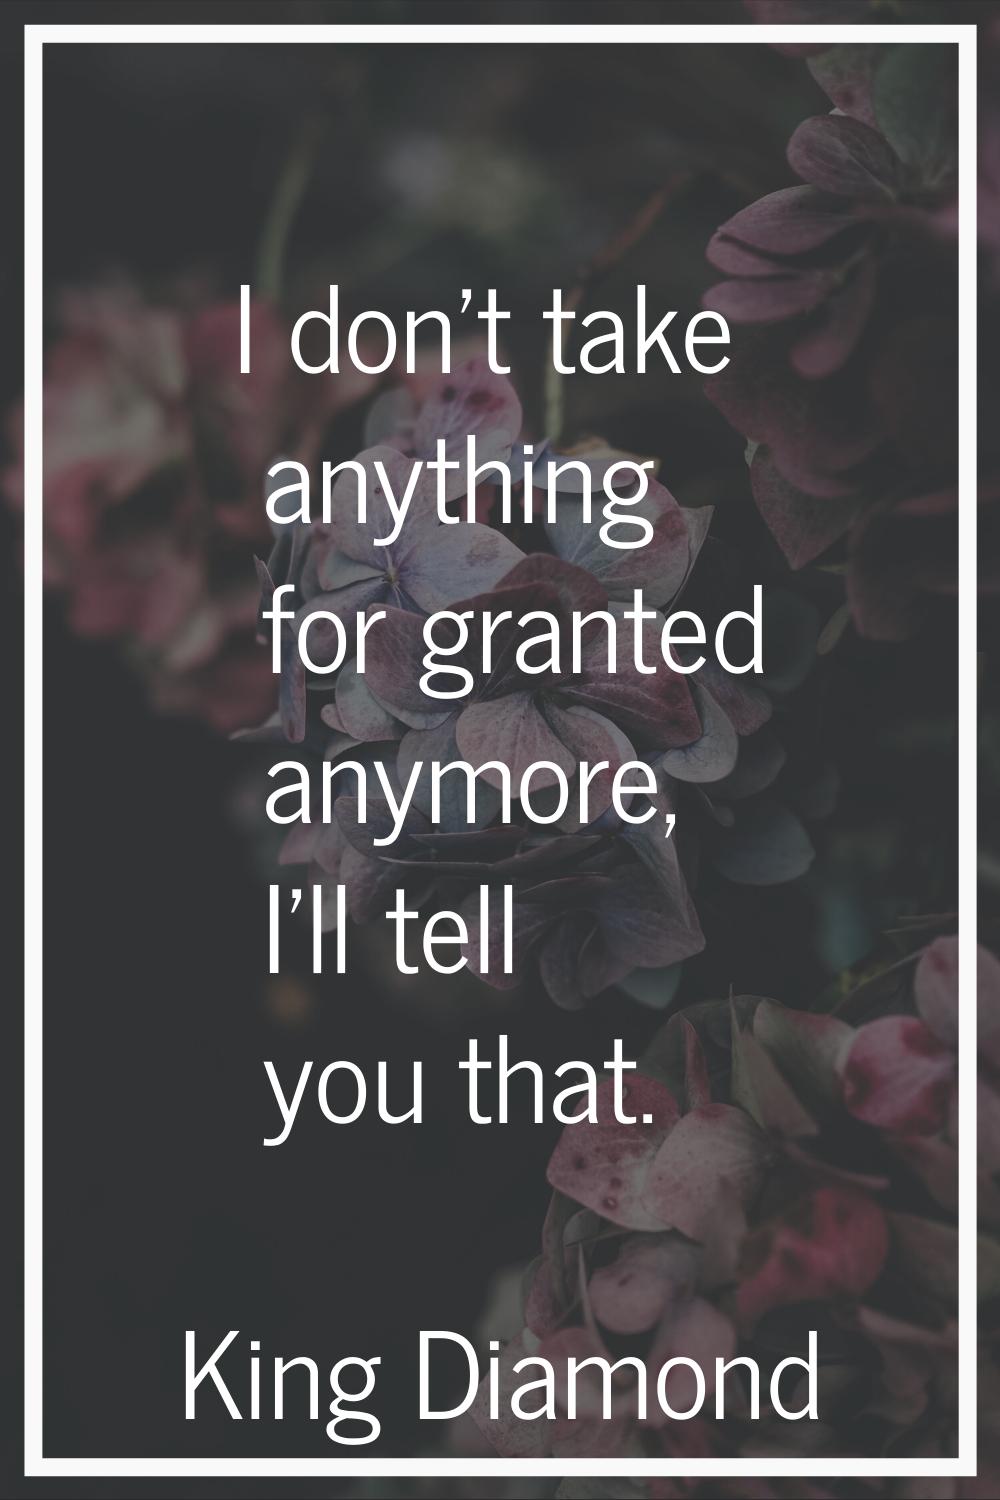 I don't take anything for granted anymore, I'll tell you that.